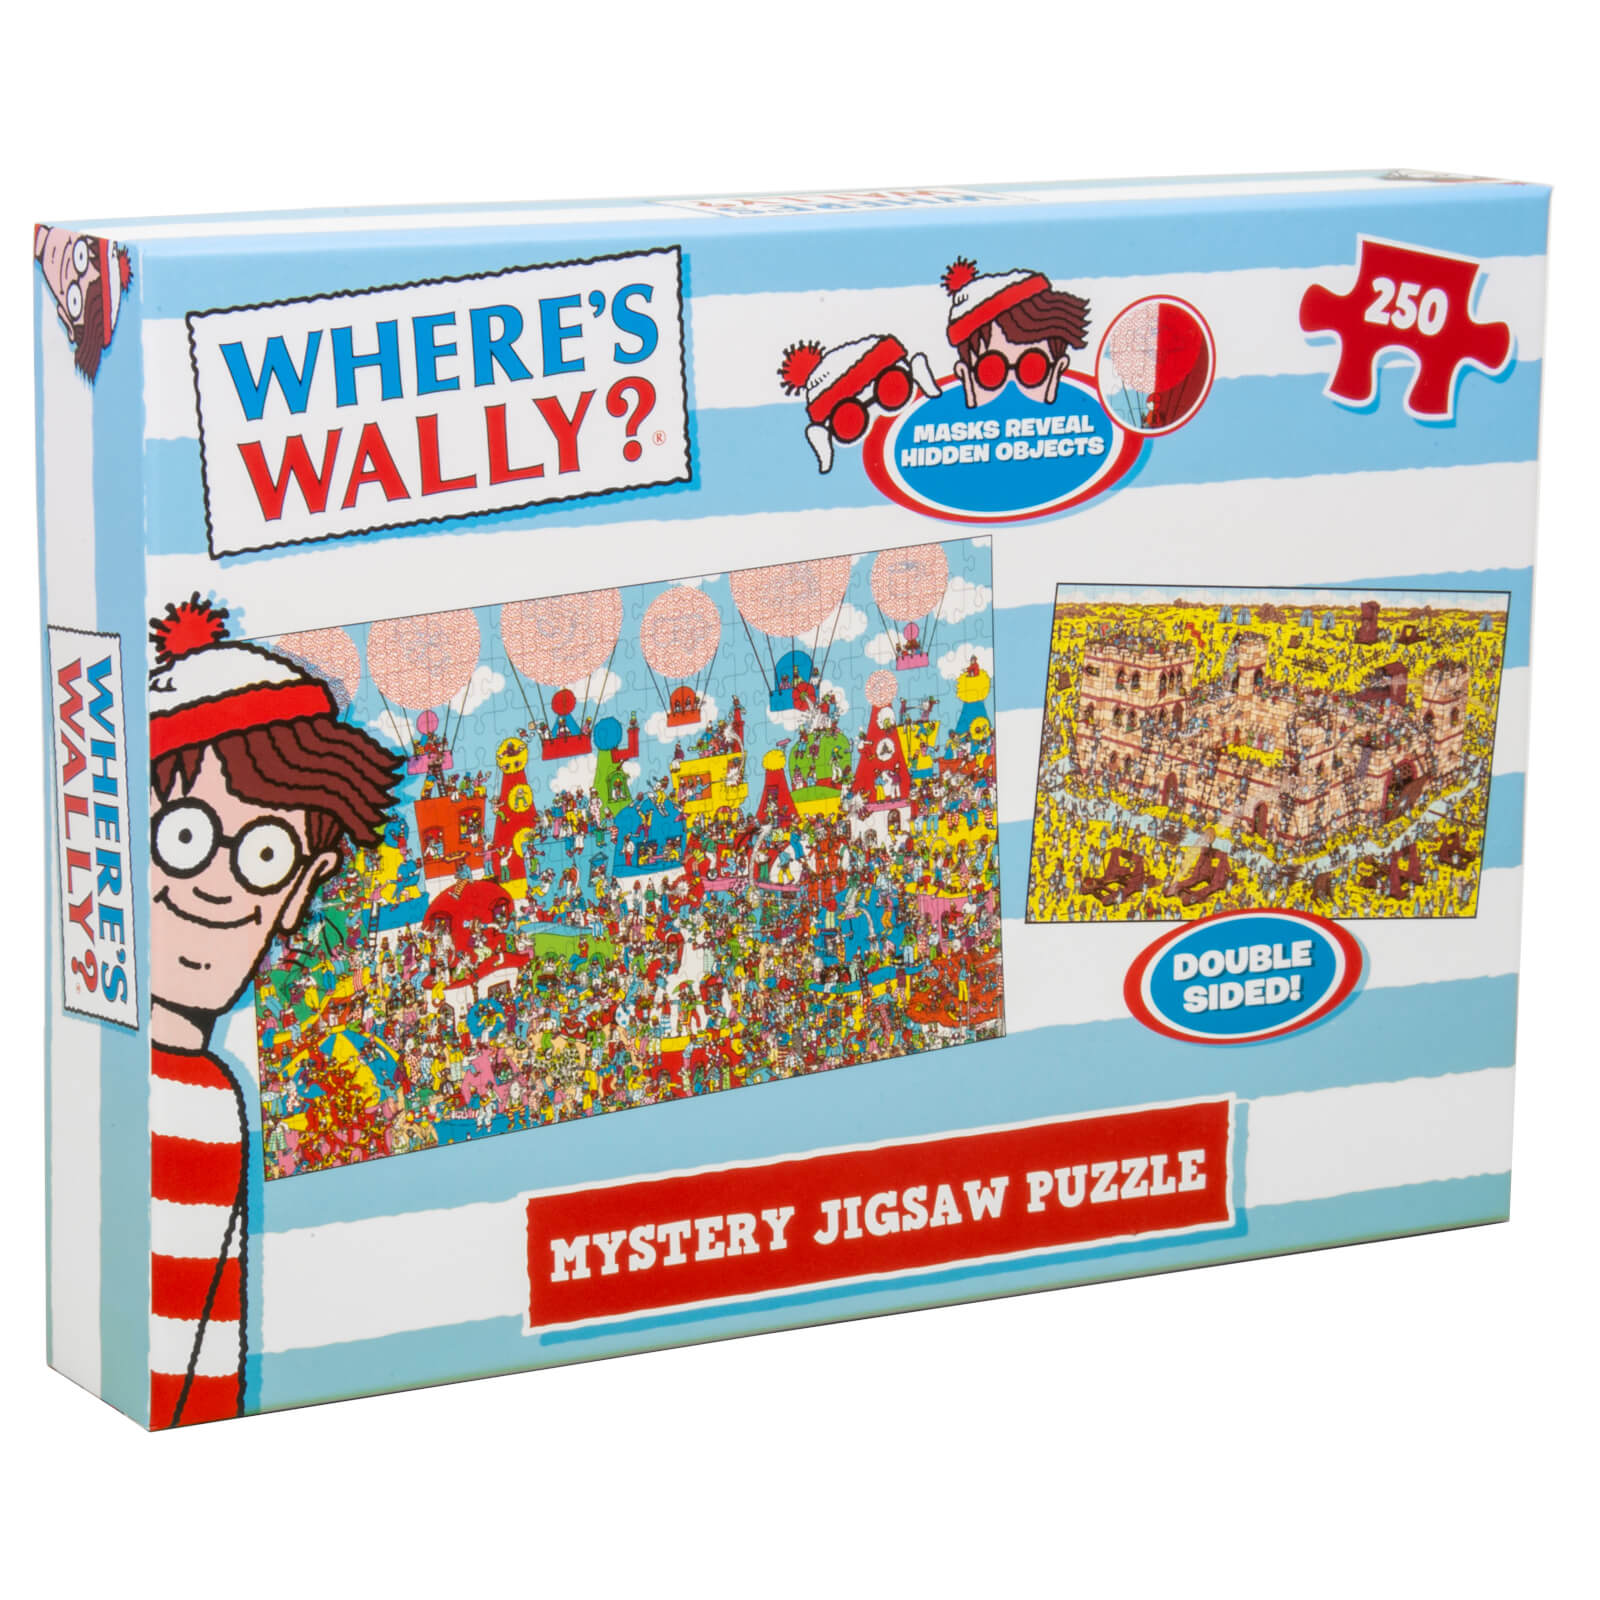 Image of Where's Wally Double Sided Mystery Jigsaw Puzzle 250pcs